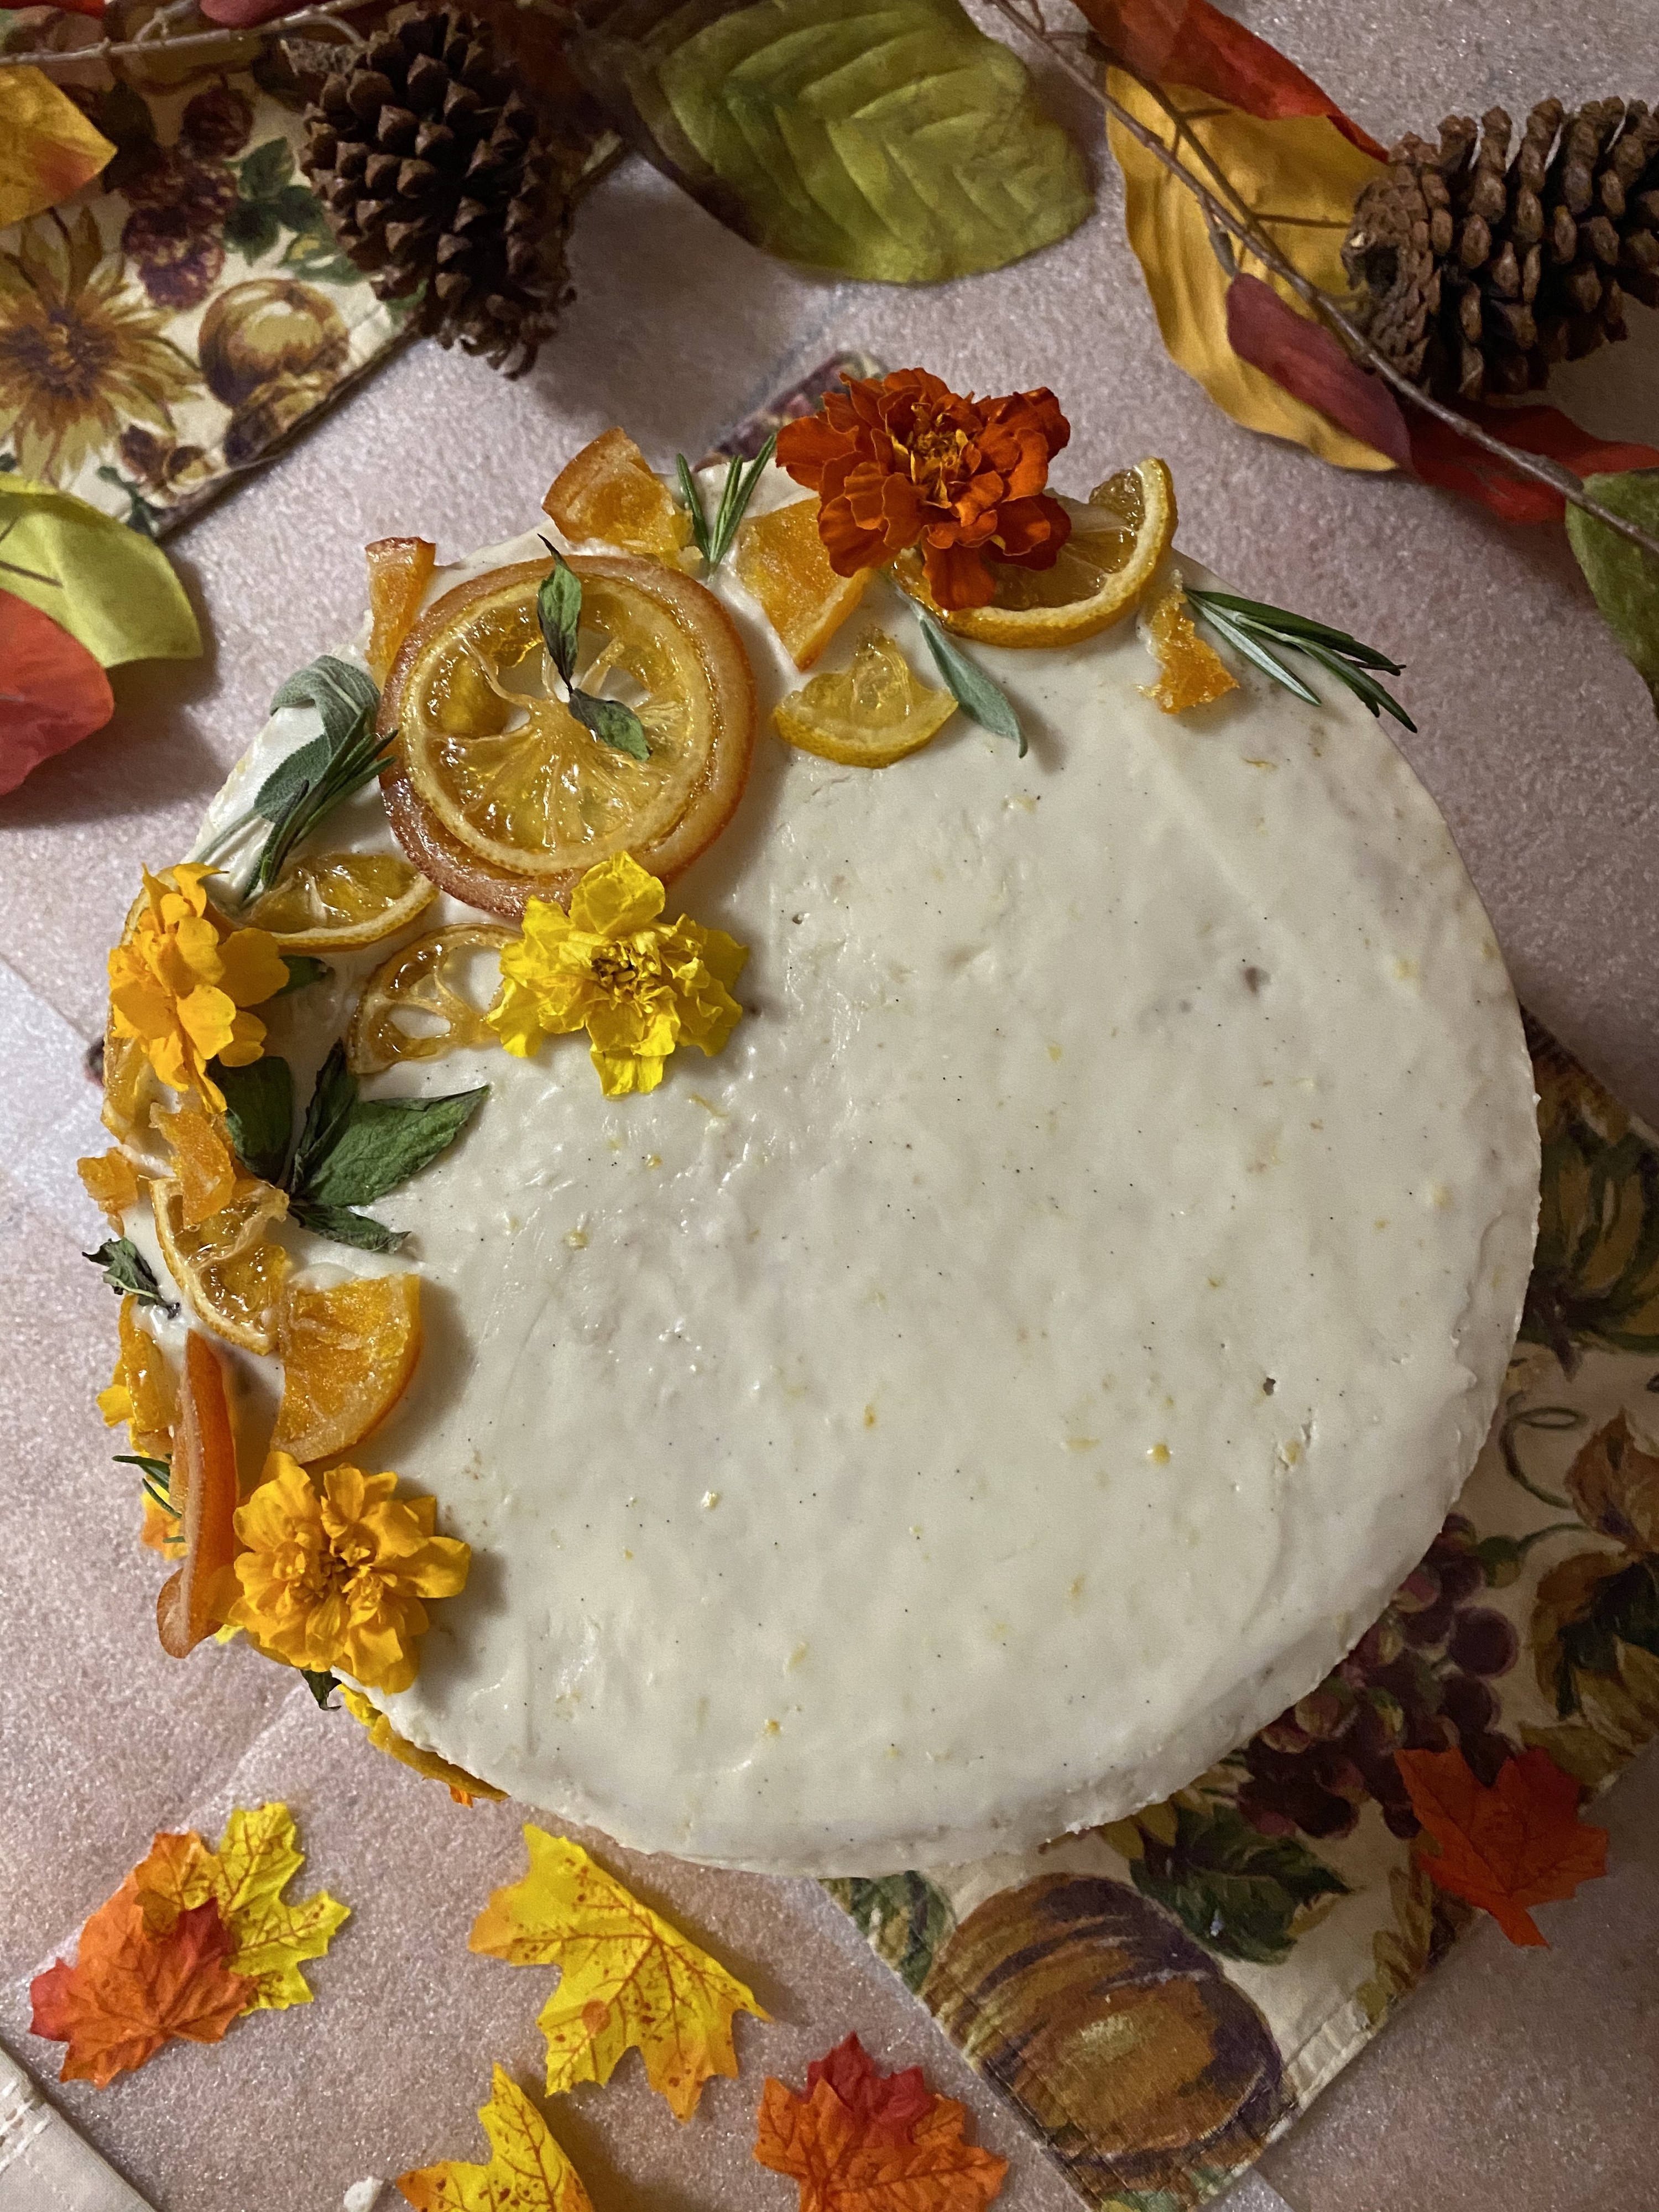 A white cake, decorated with yellow edible flowers, orange and lemon slices, and green herbs. 